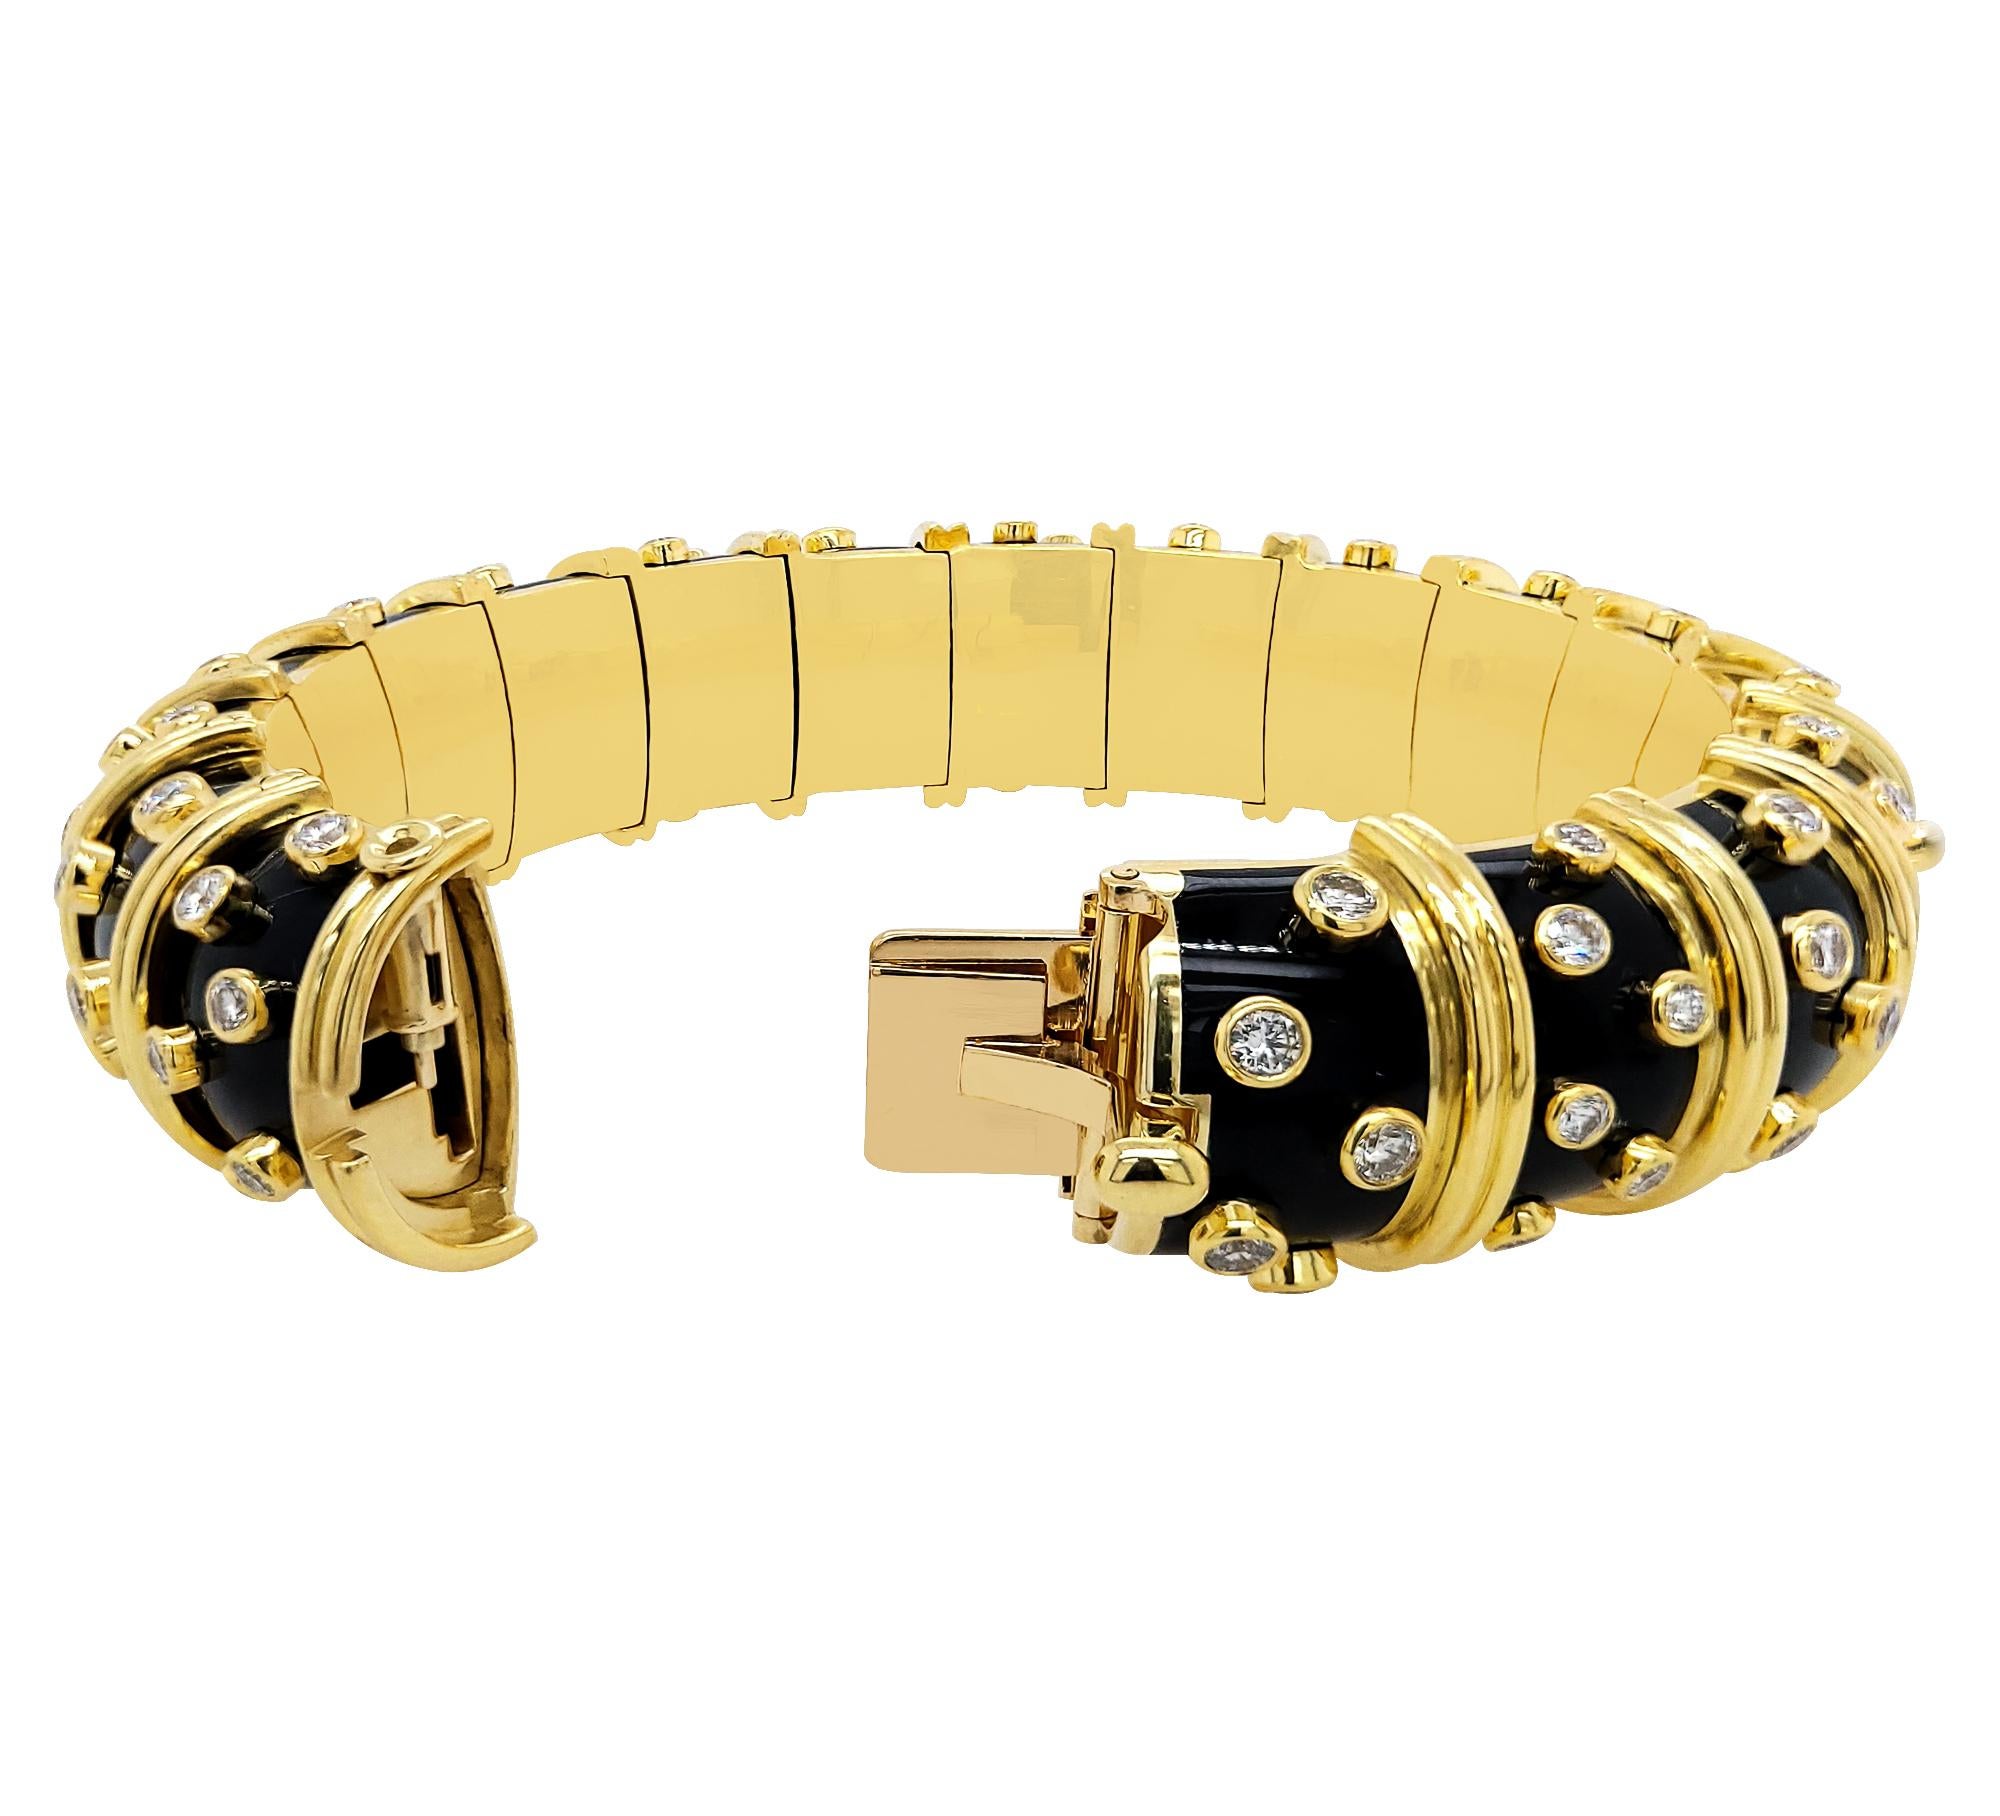 A stunning wide bracelet from Tiffany & Co. Schlumberger collection.
It's decorated with round diamonds, black enamel and set in 18k yellow gold.
Weight of the bracelet is 119.78 grams.

Signed Tiffany & Co. Schlumberger 
750 France

Diameter is